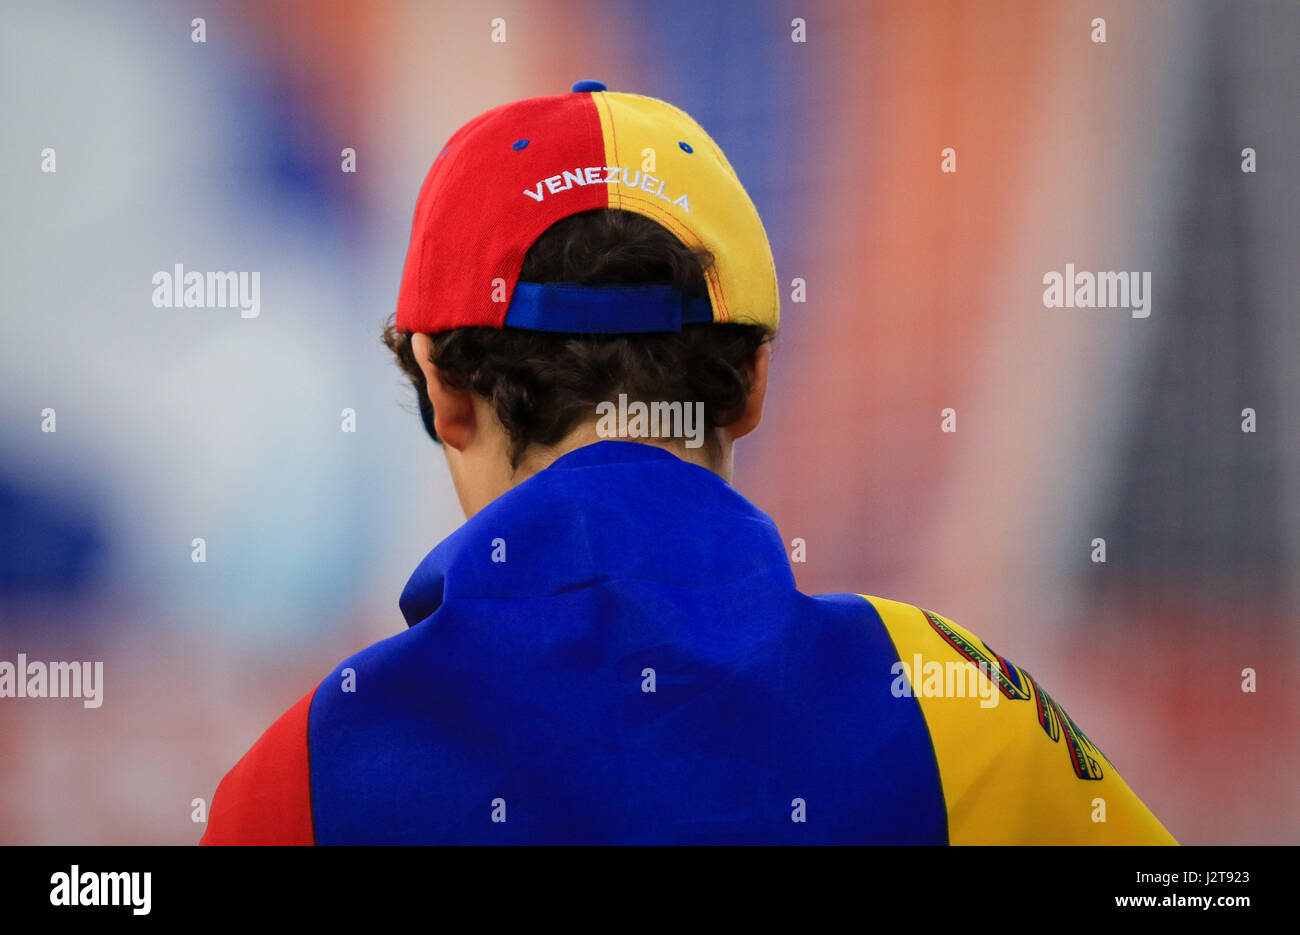 Miami, Florida, USA. 29th Apr, 2017. A Miami FC fan displays a baseball cap with the Venezuelan flag colors and country's name, as he is involved with the Venezuelan flag, in solidarity with the country's current anti-goverment uprising, during a North American Soccer League game between FC Edmonton vs Miami FC at the Riccardo Silva Stadium in Miami, Florida. Miami FC won 2-0. Mario Houben/CSM/Alamy Live News Stock Photo